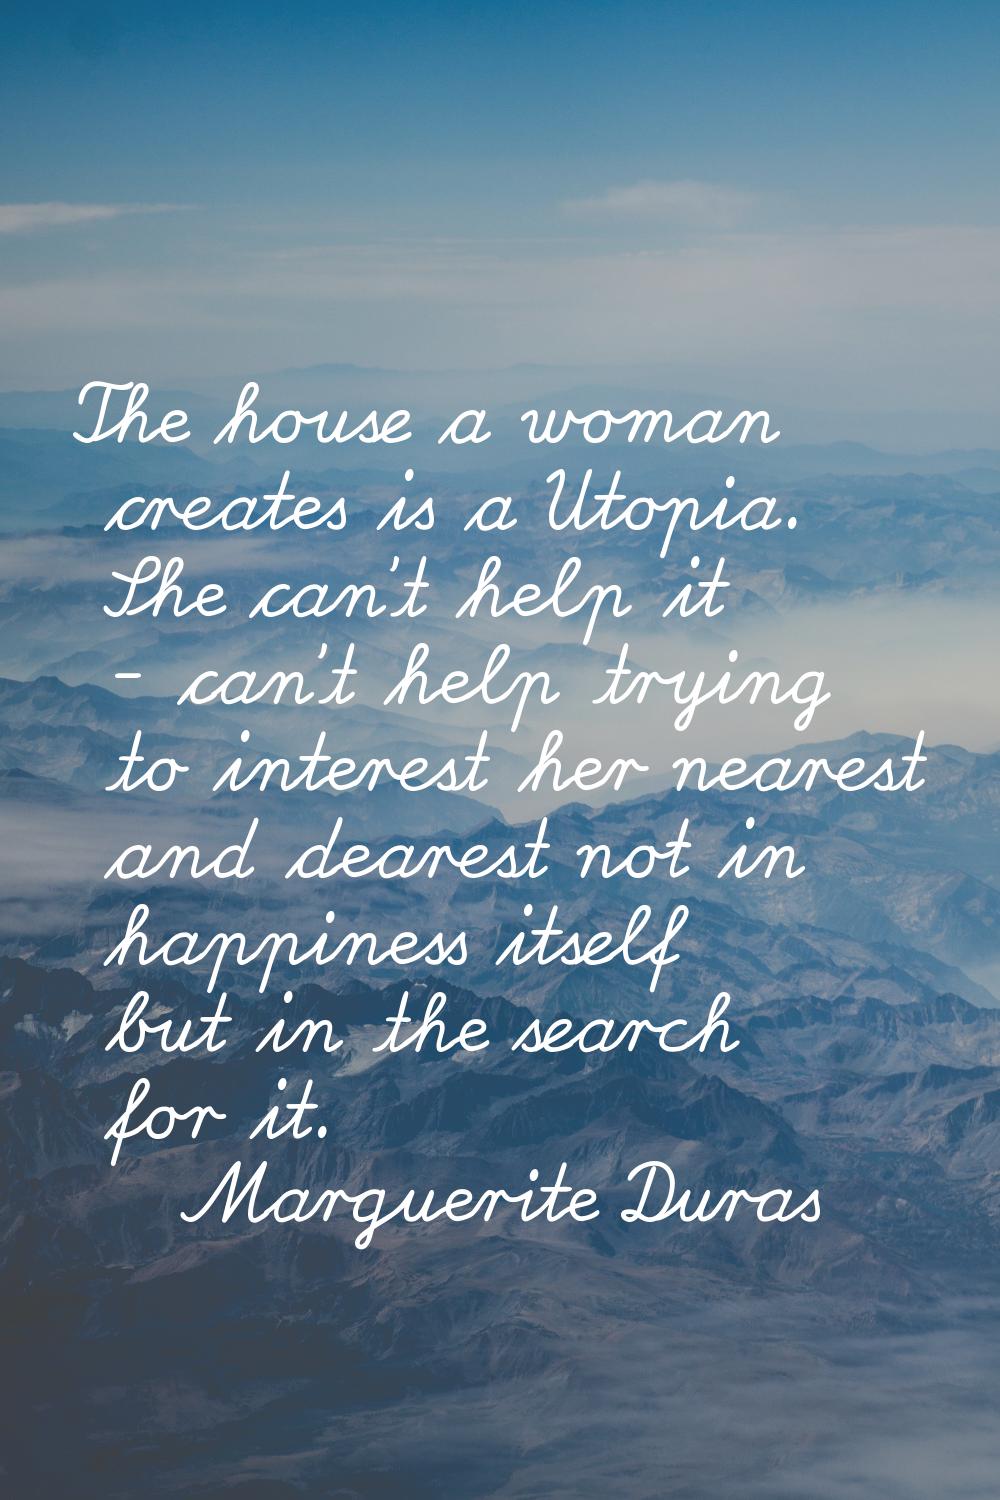 The house a woman creates is a Utopia. She can't help it - can't help trying to interest her neares